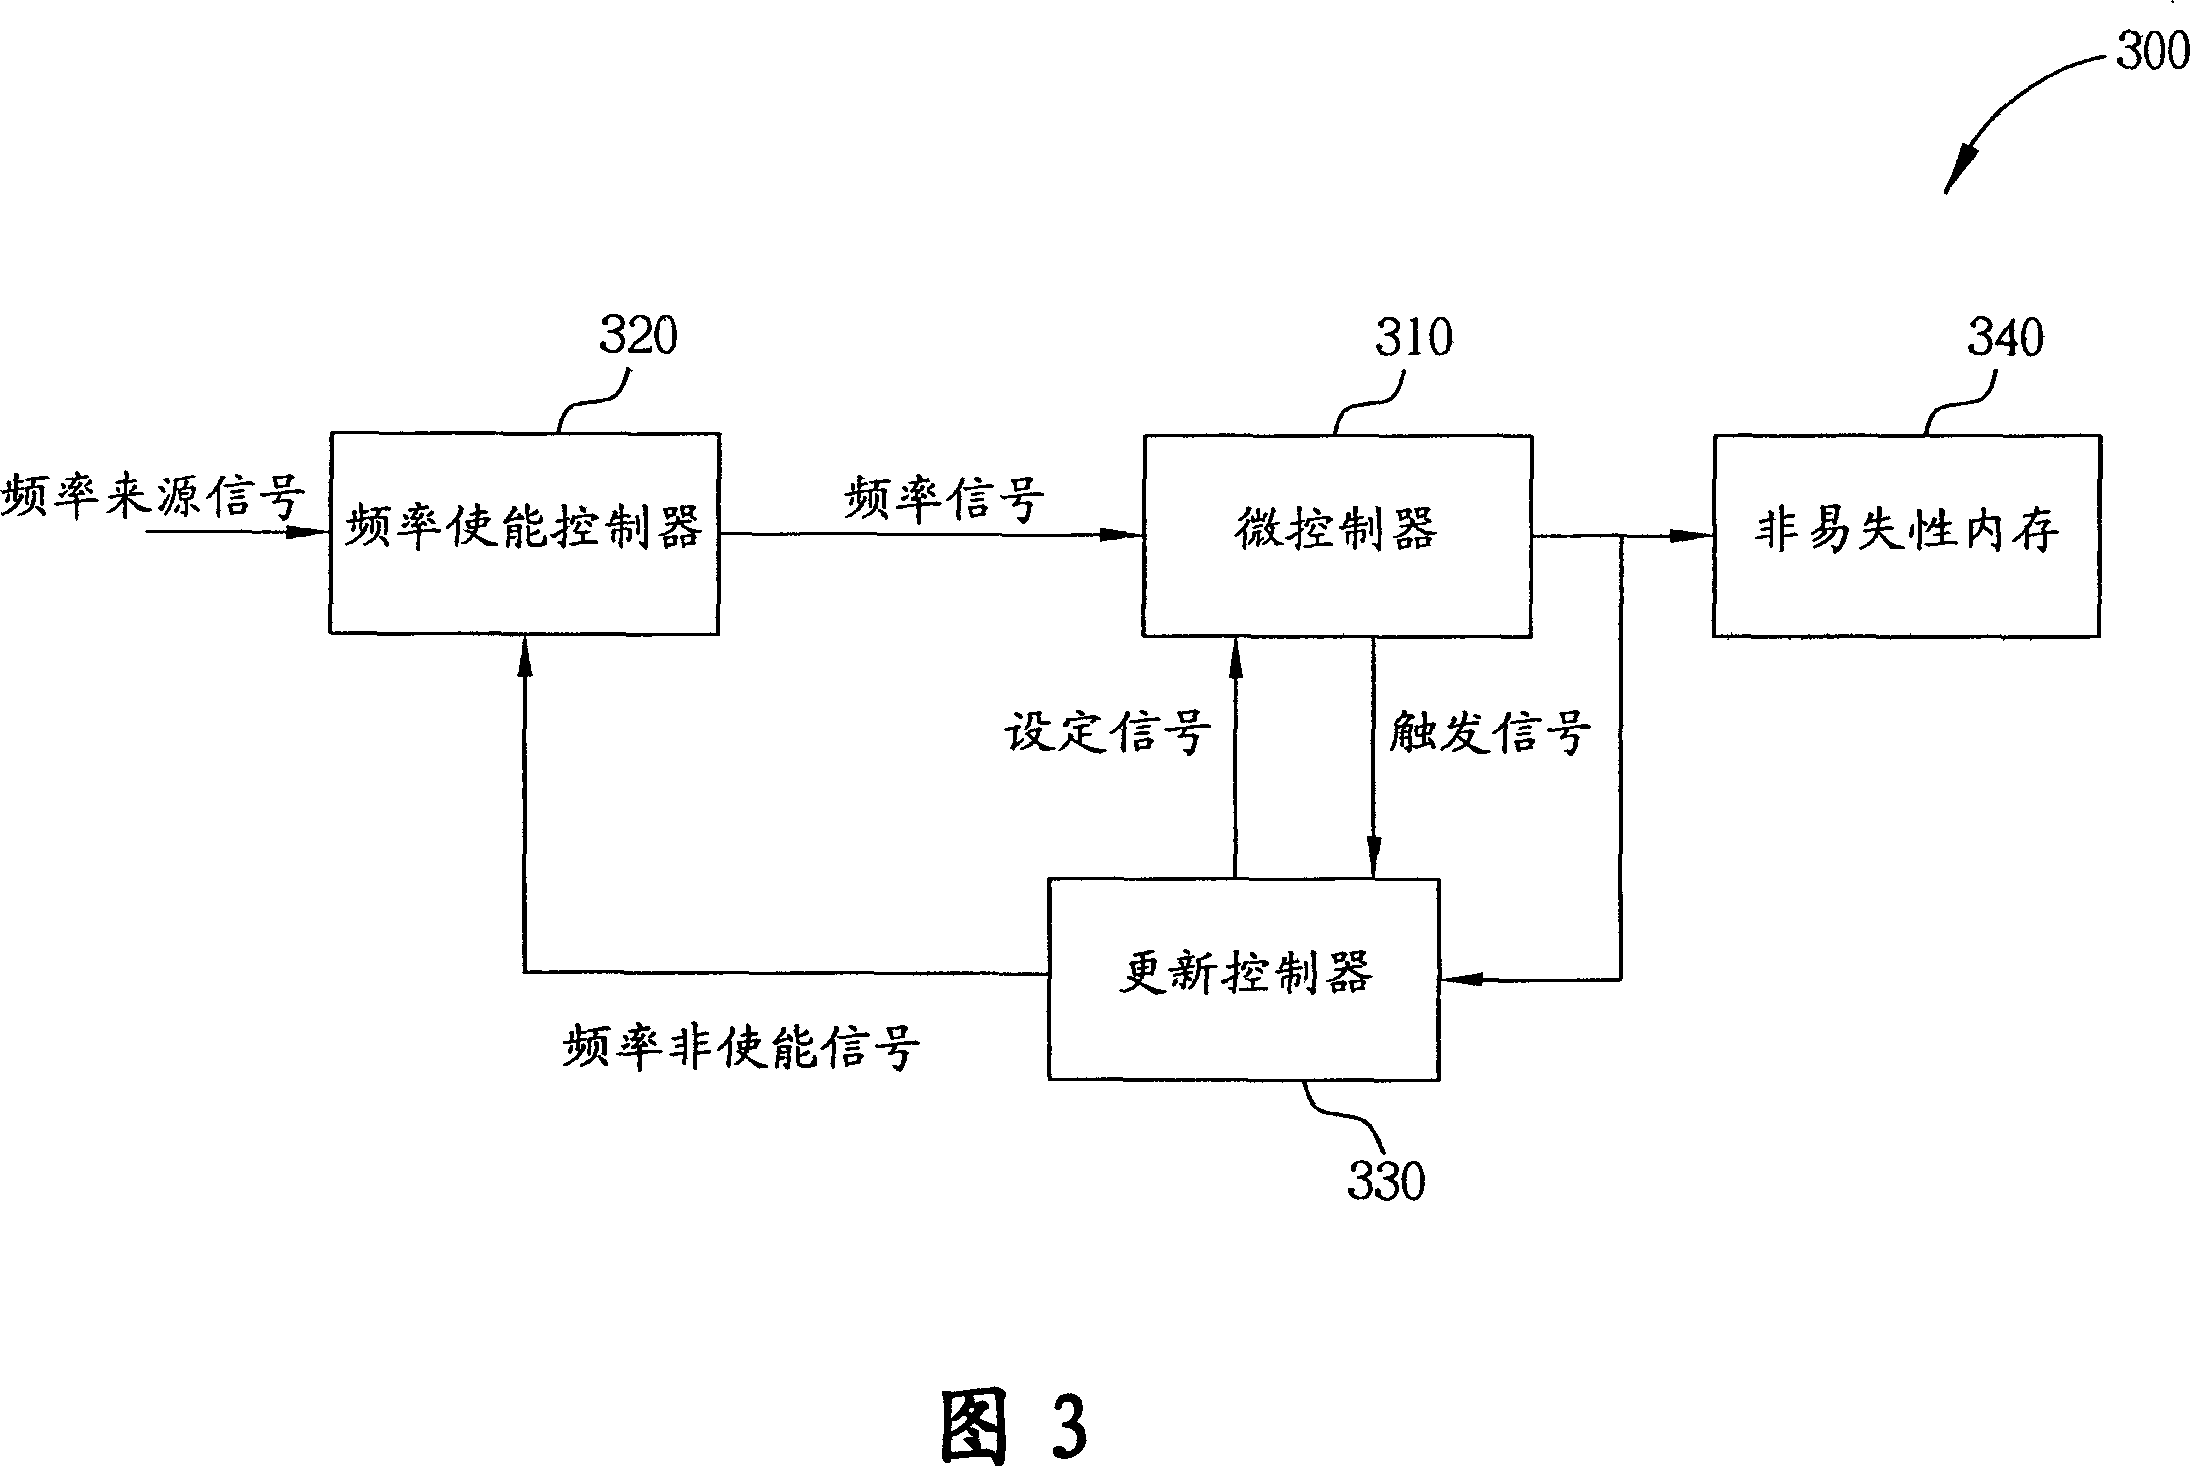 Method and apparatus for updating firmware